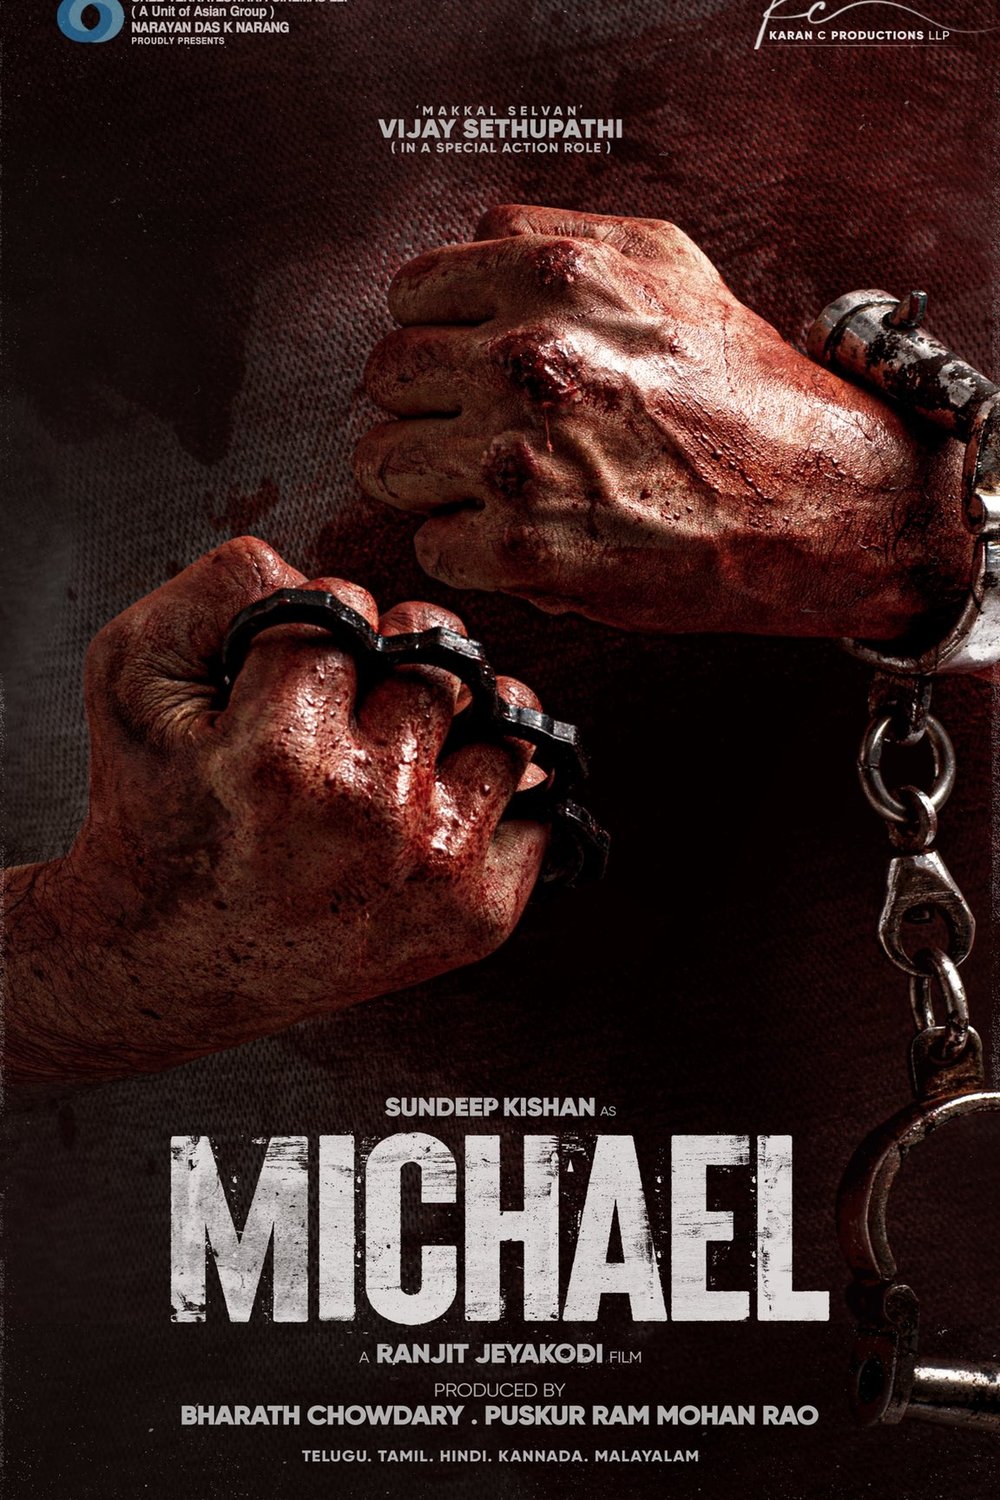 Tamil poster of the movie Michael